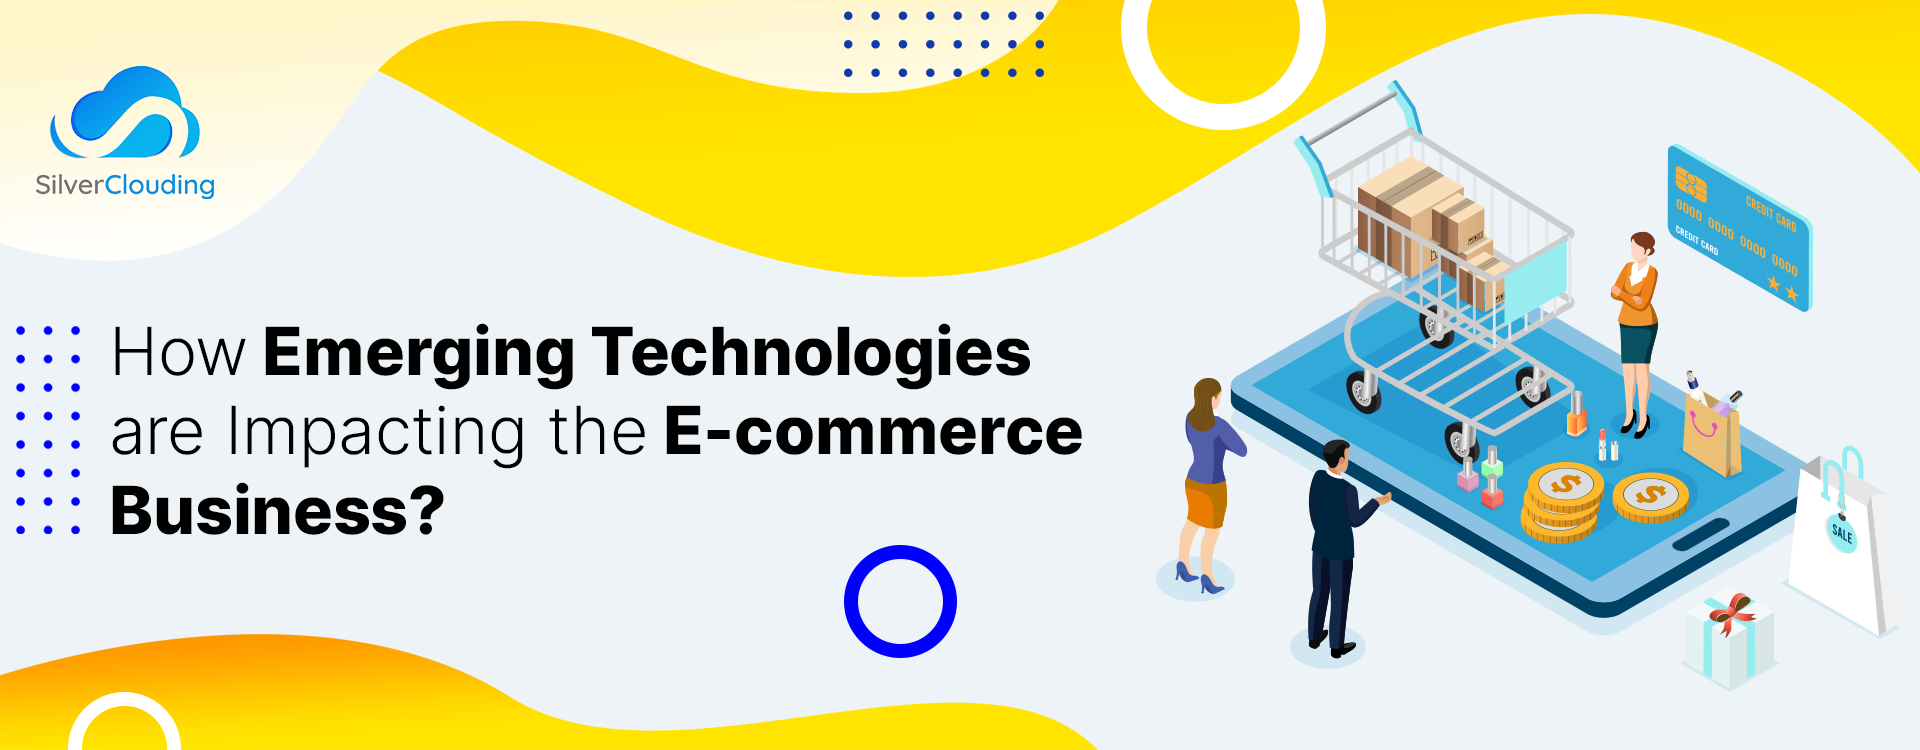 How Emerging Technologies are Impacting the E-commerce Businesses?